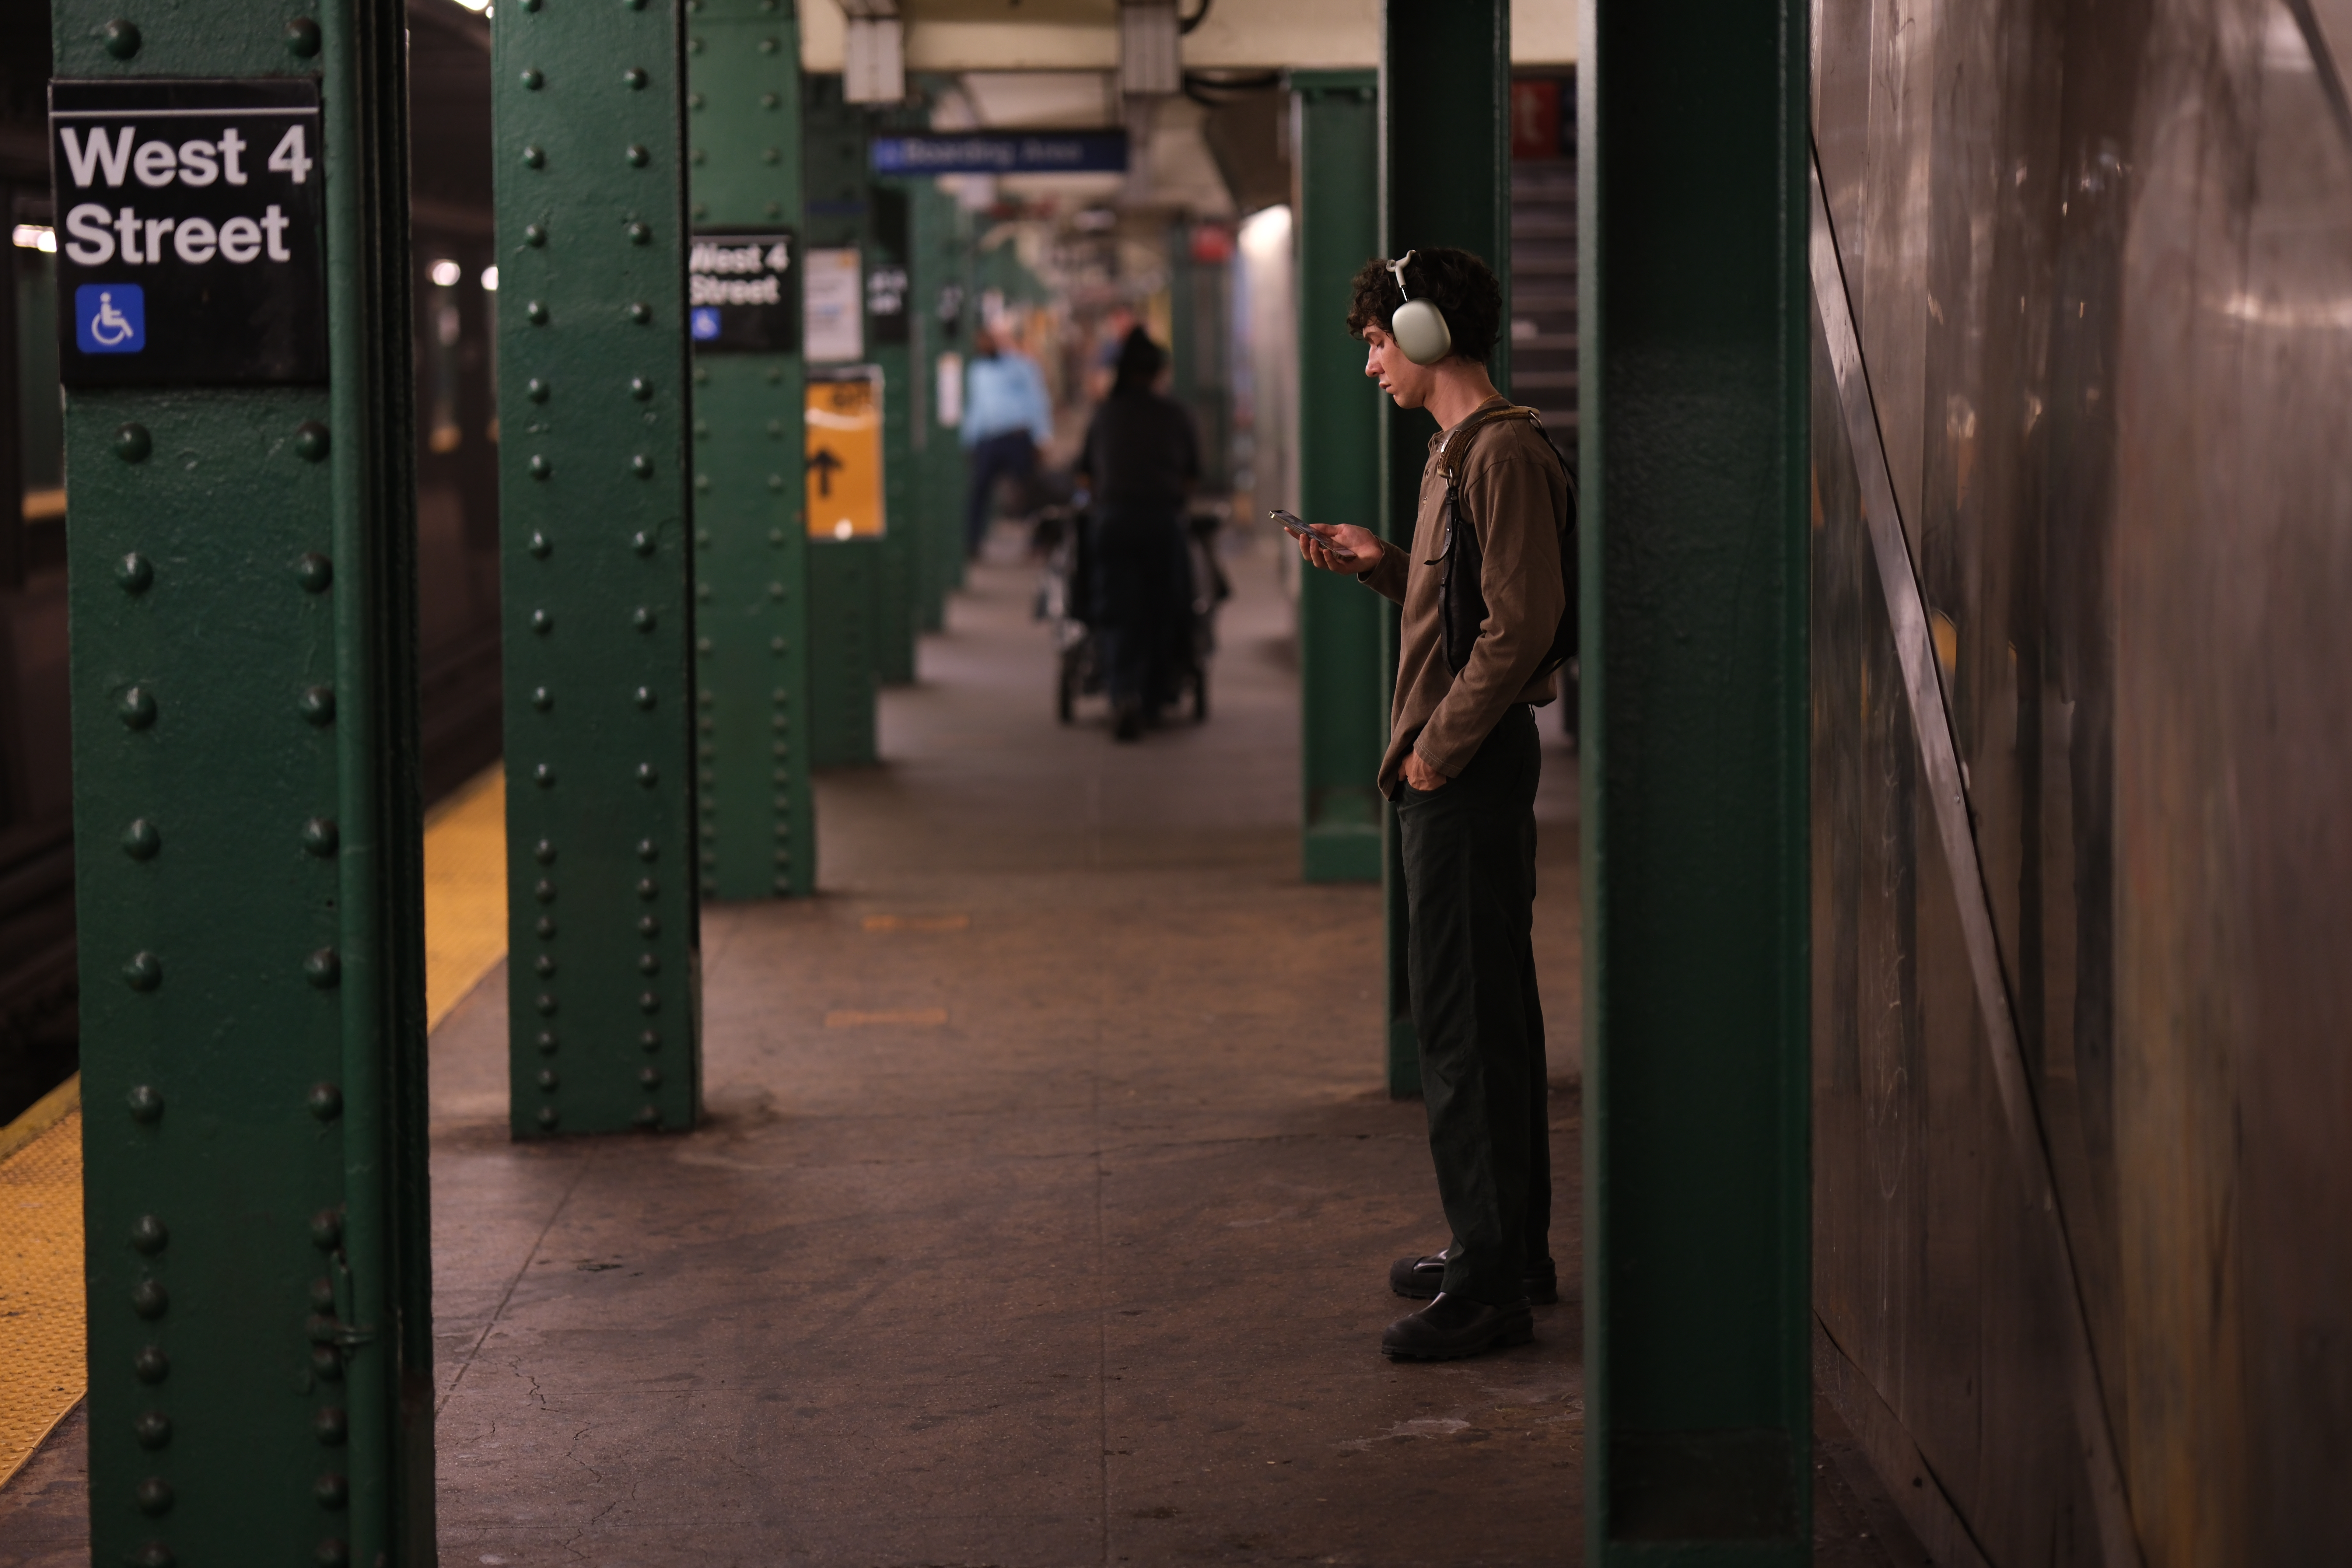 West 4 Street Subway station, taken with X-H2, 1/85s, f/1.2, ISO250, 56mm, Joshua Waller